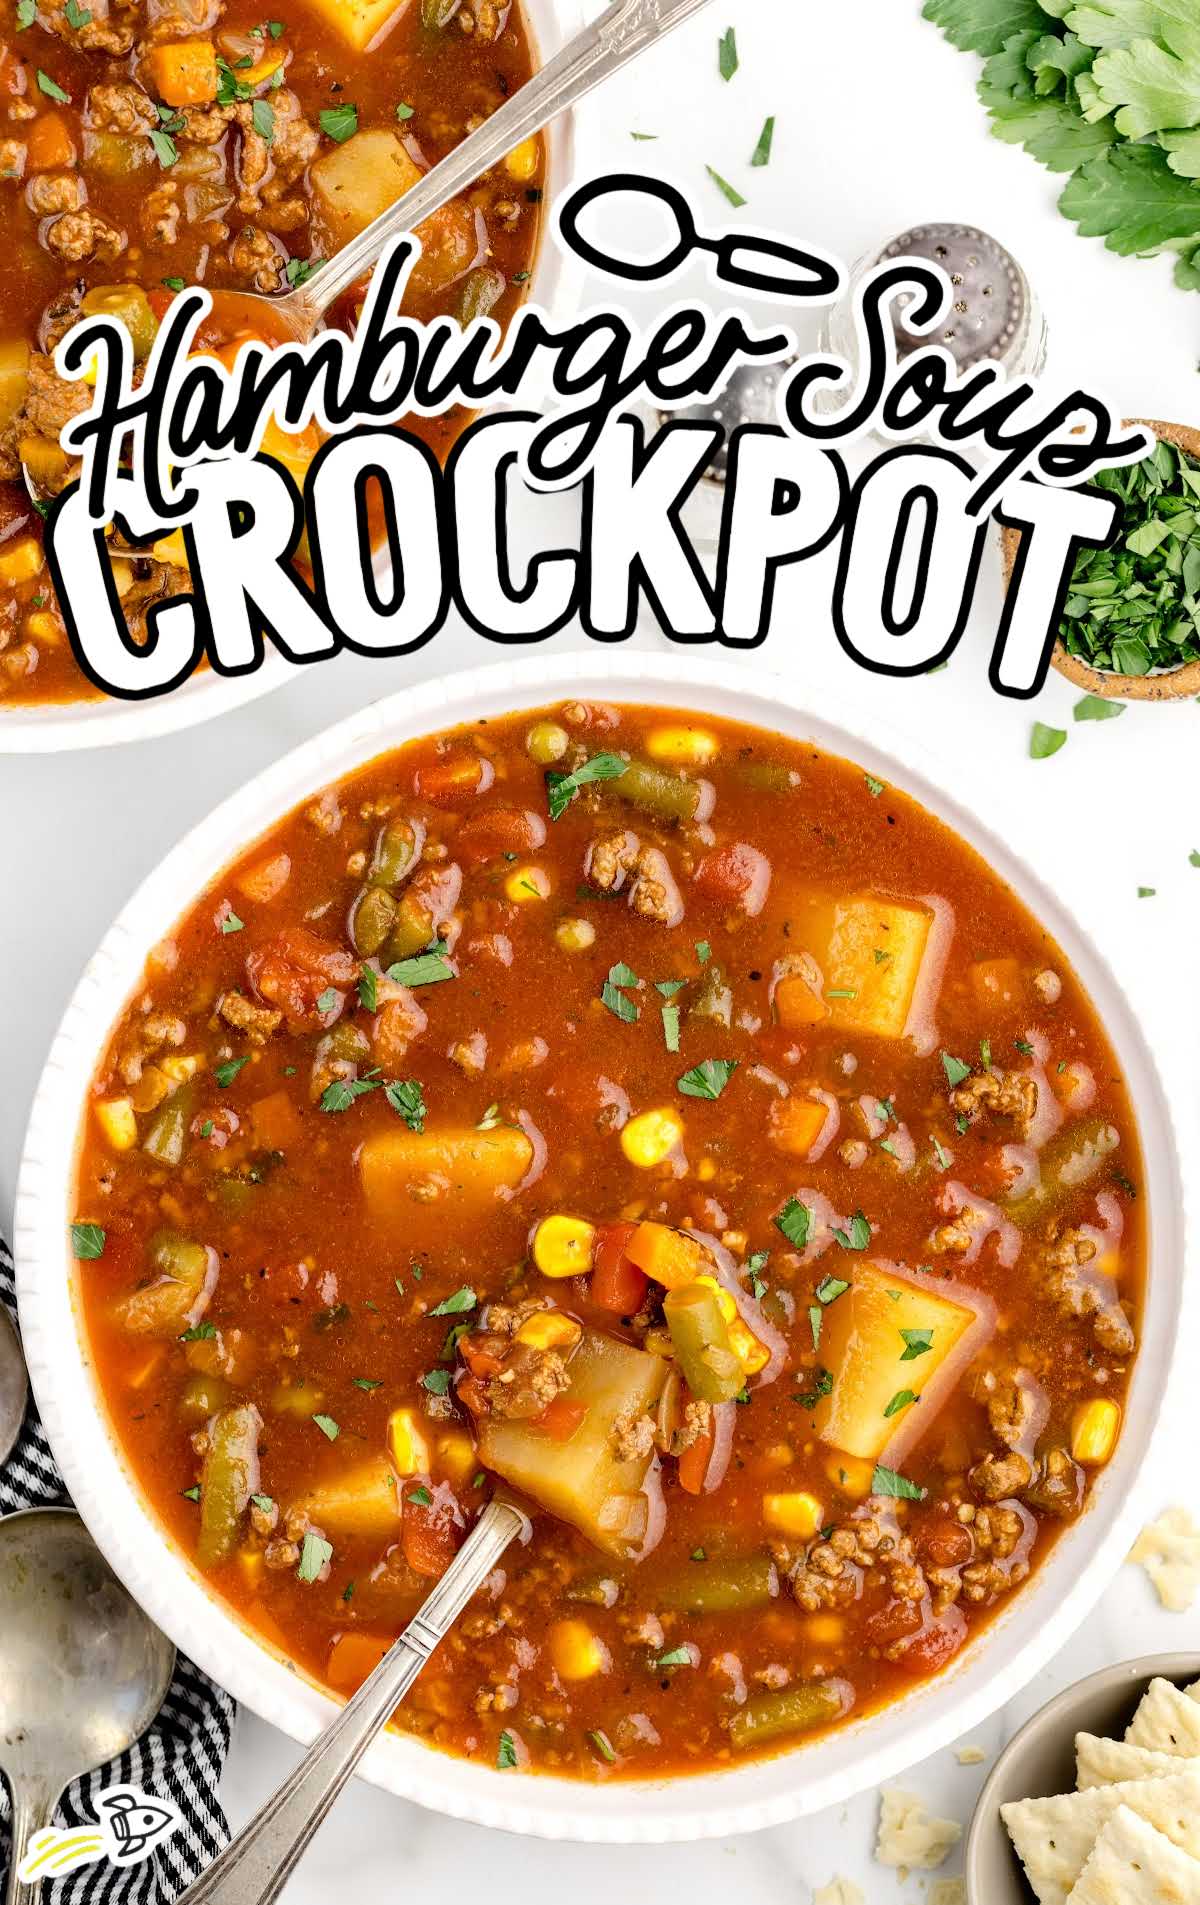 overhead shot of Hamburger Soup Crockpot with a spoon in a bowl